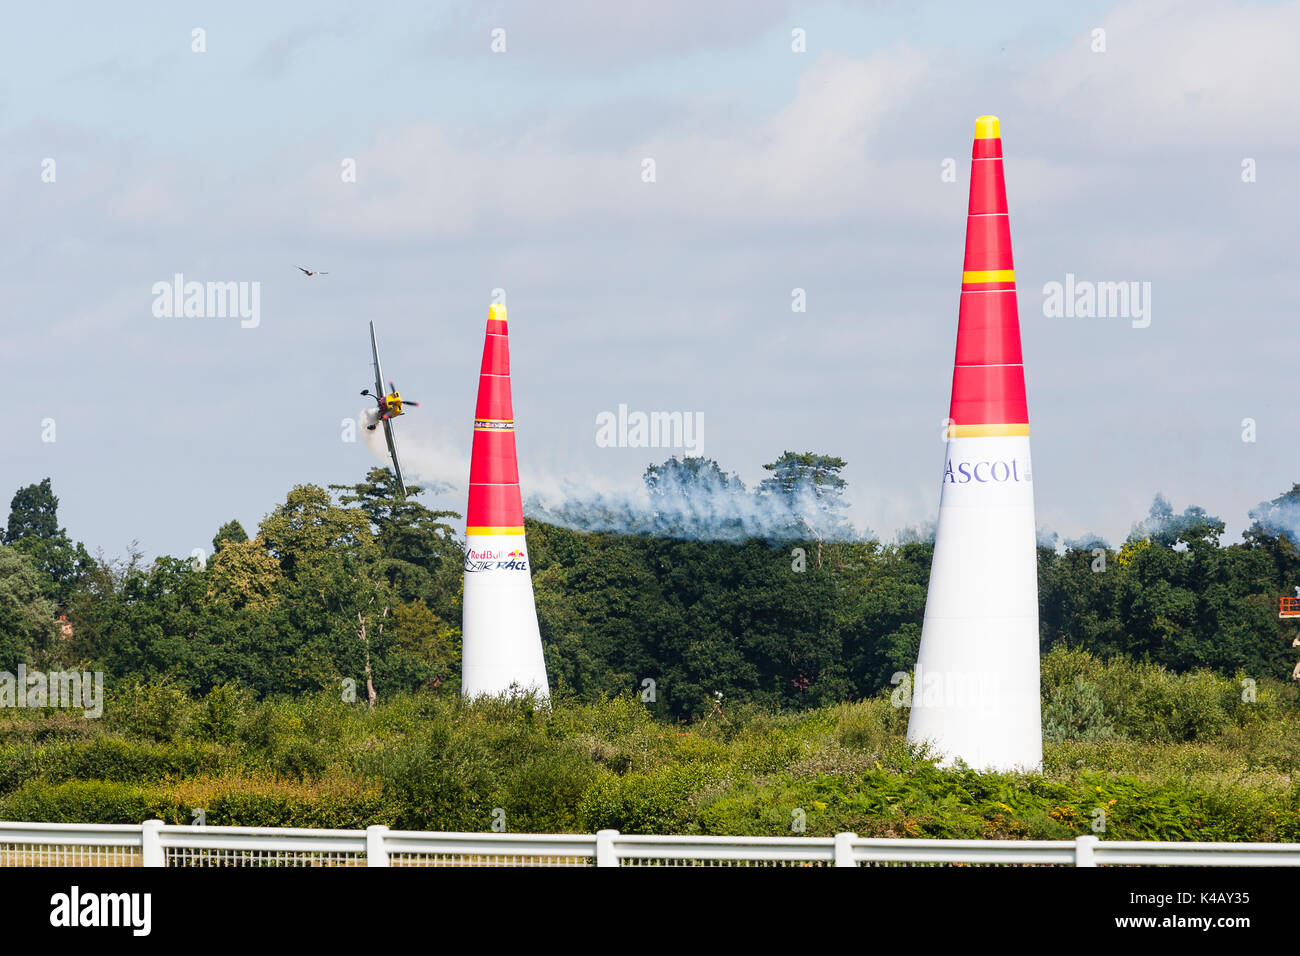 Ascot, Berkshire, UK. High-octane action over Ascot race course on day one of the Red Bull Air Race. Stock Photo